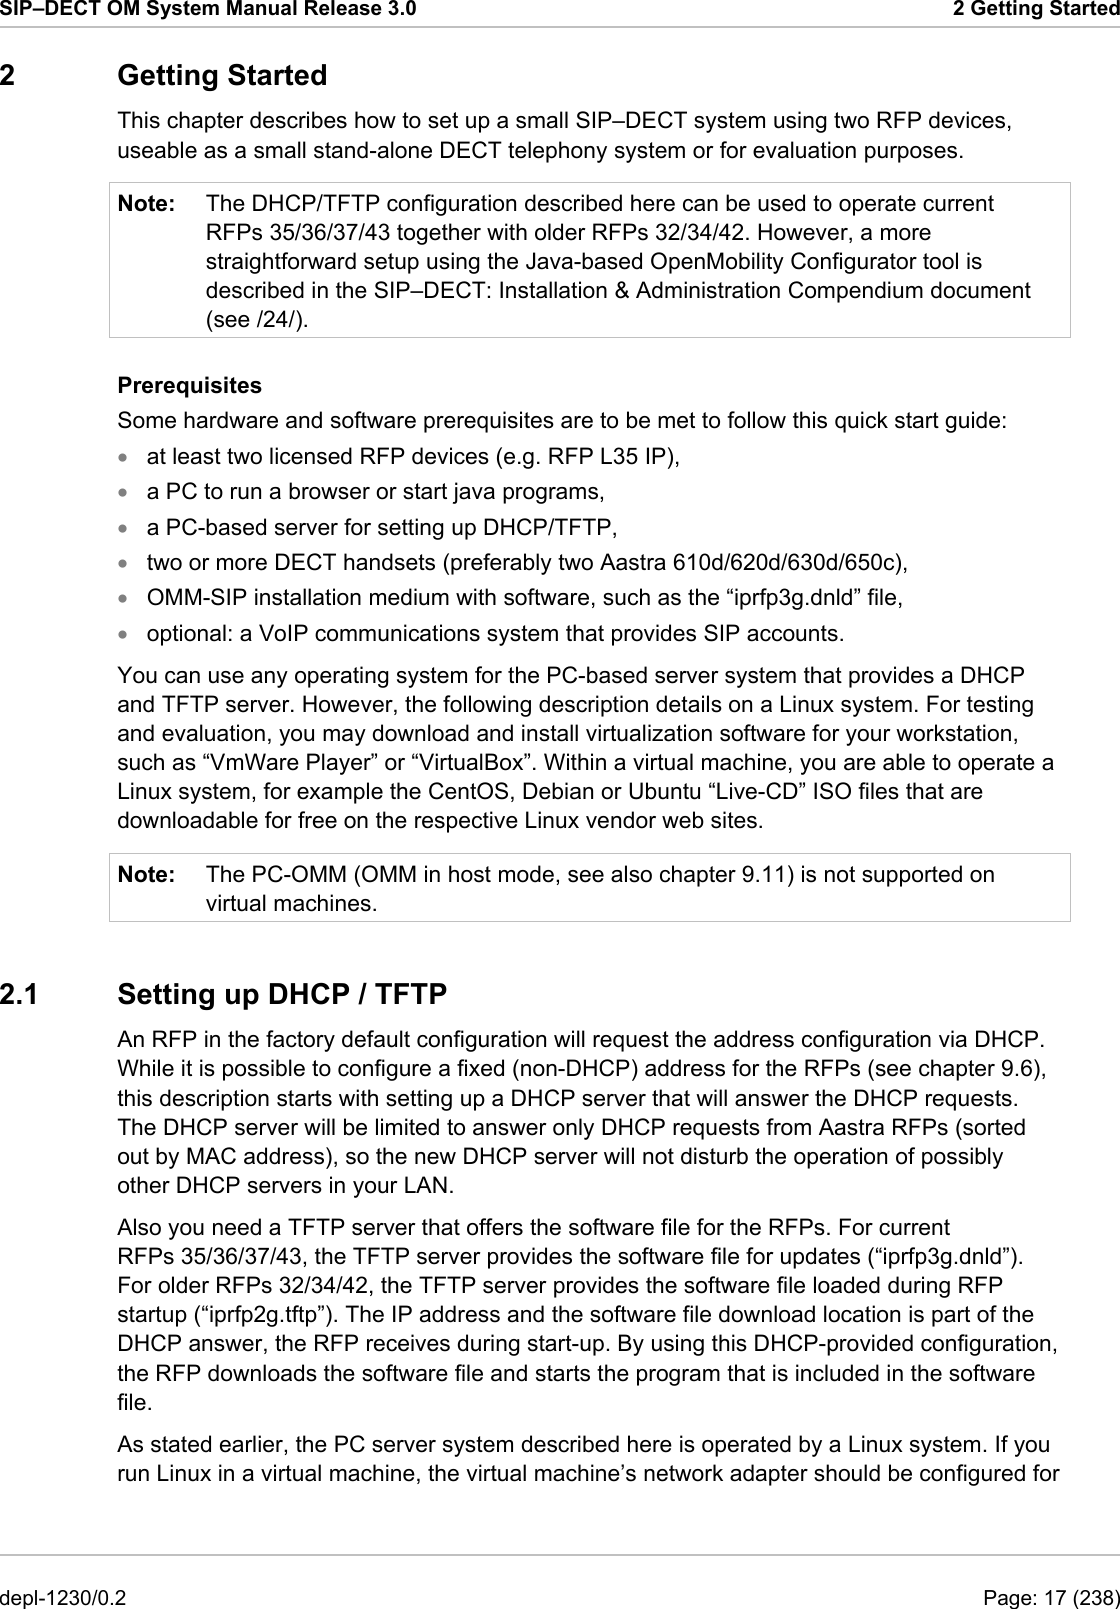 SIP–DECT OM System Manual Release 3.0  2 Getting Started 2 Getting Started This chapter describes how to set up a small SIP–DECT system using two RFP devices, useable as a small stand-alone DECT telephony system or for evaluation purposes.  Note:  The DHCP/TFTP configuration described here can be used to operate current RFPs 35/36/37/43 together with older RFPs 32/34/42. However, a more straightforward setup using the Java-based OpenMobility Configurator tool is described in the SIP–DECT: Installation &amp; Administration Compendium document (see /24/). Prerequisites Some hardware and software prerequisites are to be met to follow this quick start guide: • • • • • • Note: at least two licensed RFP devices (e.g. RFP L35 IP), a PC to run a browser or start java programs, a PC-based server for setting up DHCP/TFTP, two or more DECT handsets (preferably two Aastra 610d/620d/630d/650c), OMM-SIP installation medium with software, such as the “iprfp3g.dnld” file, optional: a VoIP communications system that provides SIP accounts. You can use any operating system for the PC-based server system that provides a DHCP and TFTP server. However, the following description details on a Linux system. For testing and evaluation, you may download and install virtualization software for your workstation, such as “VmWare Player” or “VirtualBox”. Within a virtual machine, you are able to operate a Linux system, for example the CentOS, Debian or Ubuntu “Live-CD” ISO files that are downloadable for free on the respective Linux vendor web sites. The PC-OMM (OMM in host mode, see also chapter 9.11) is not supported on virtual machines. 2.1  Setting up DHCP / TFTP An RFP in the factory default configuration will request the address configuration via DHCP. While it is possible to configure a fixed (non-DHCP) address for the RFPs (see chapter 9.6), this description starts with setting up a DHCP server that will answer the DHCP requests. The DHCP server will be limited to answer only DHCP requests from Aastra RFPs (sorted out by MAC address), so the new DHCP server will not disturb the operation of possibly other DHCP servers in your LAN. Also you need a TFTP server that offers the software file for the RFPs. For current RFPs 35/36/37/43, the TFTP server provides the software file for updates (“iprfp3g.dnld”). For older RFPs 32/34/42, the TFTP server provides the software file loaded during RFP startup (“iprfp2g.tftp”). The IP address and the software file download location is part of the DHCP answer, the RFP receives during start-up. By using this DHCP-provided configuration, the RFP downloads the software file and starts the program that is included in the software file. As stated earlier, the PC server system described here is operated by a Linux system. If you run Linux in a virtual machine, the virtual machine’s network adapter should be configured for depl-1230/0.2  Page: 17 (238) 